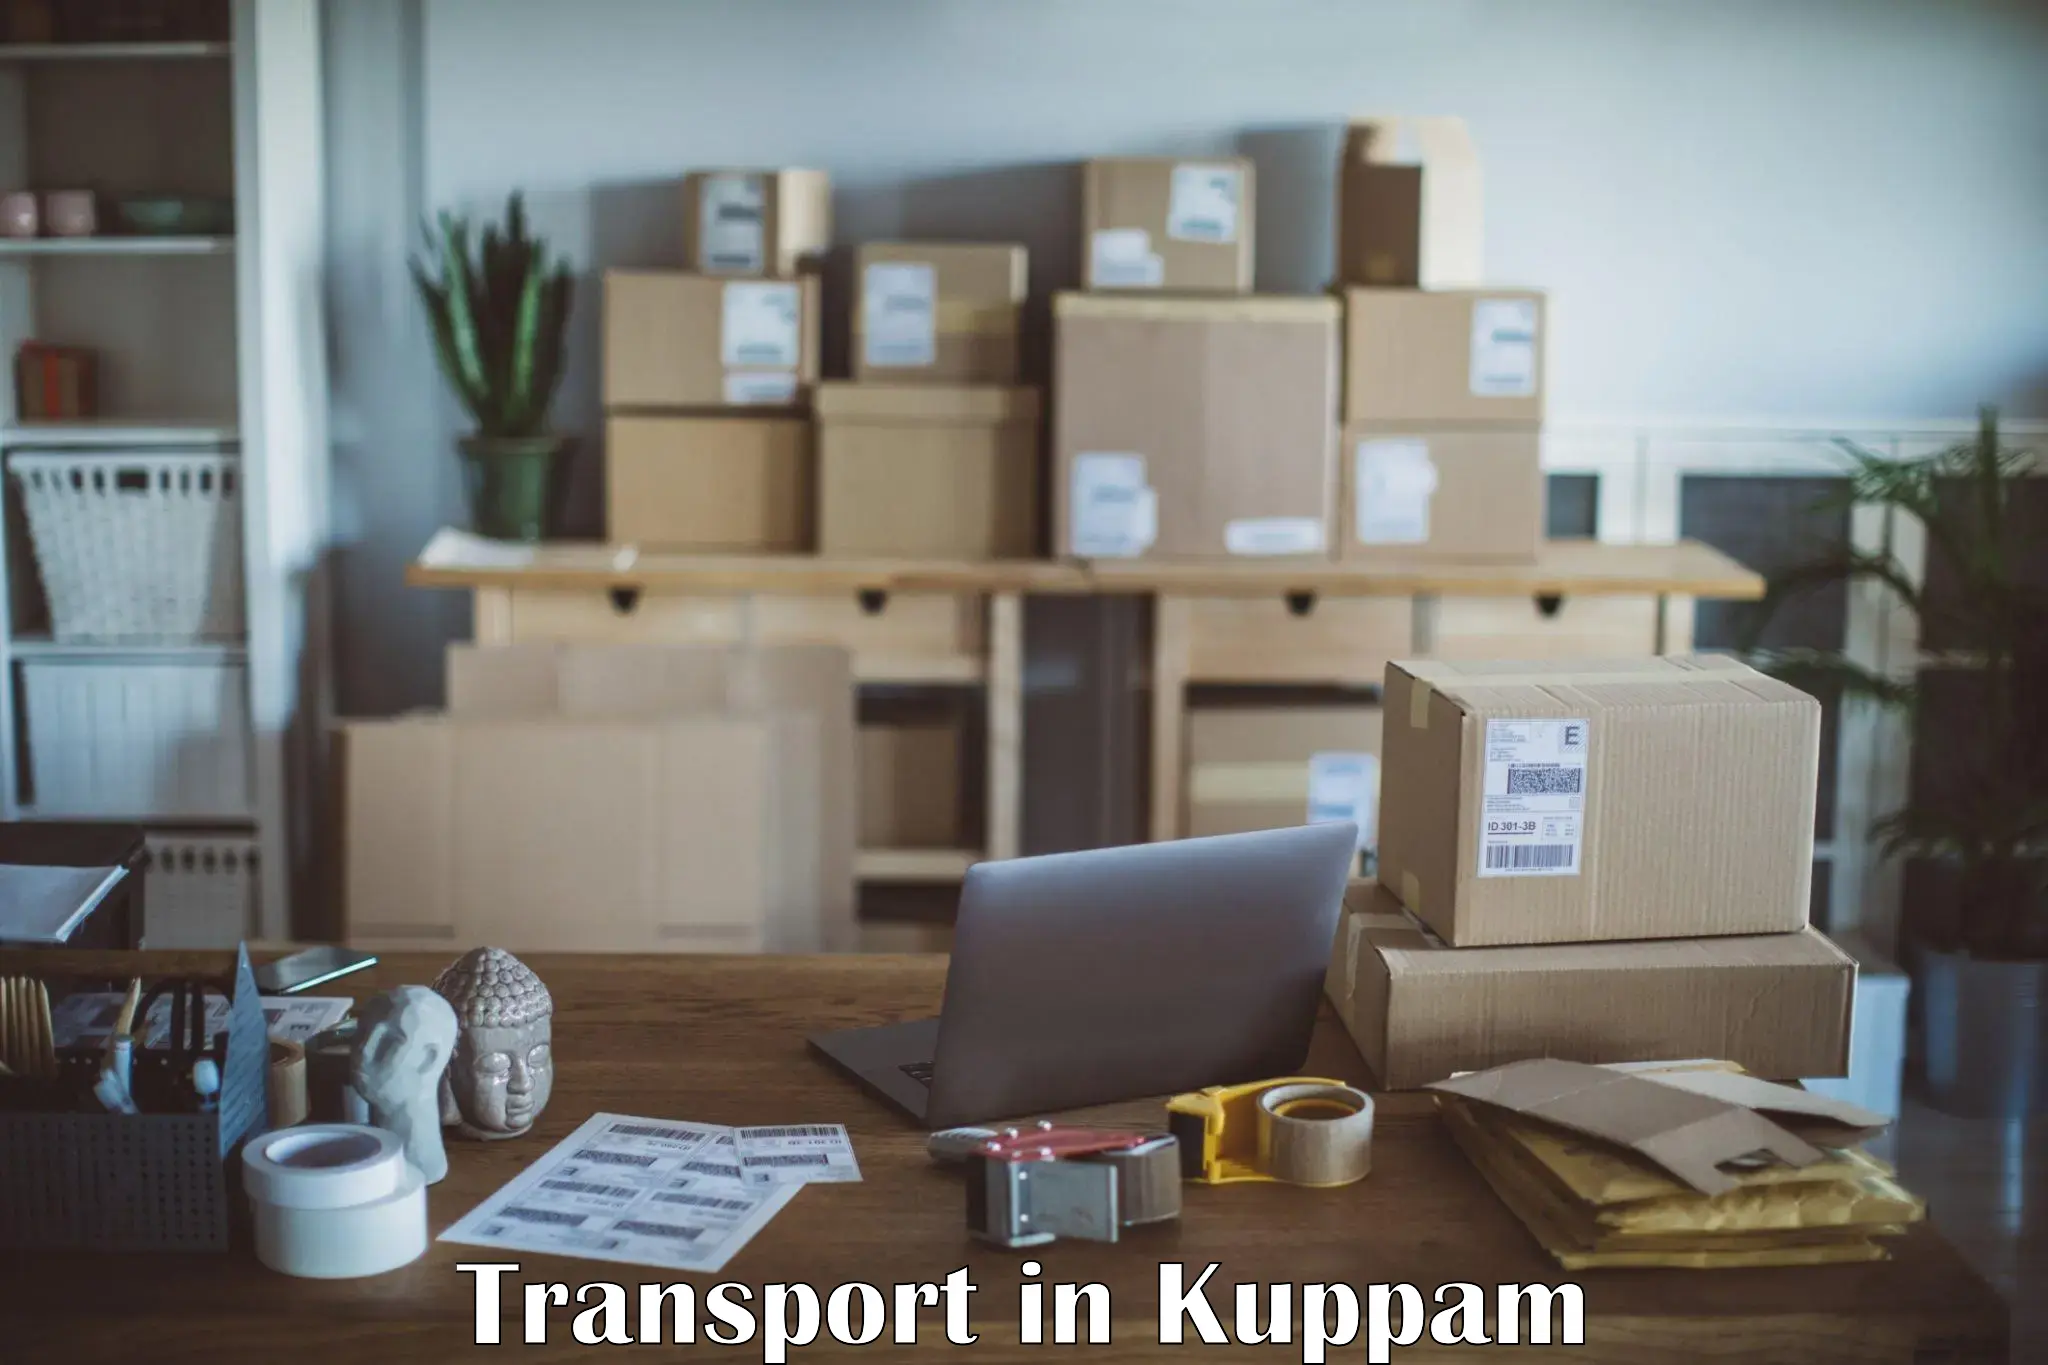 Luggage transport services in Kuppam